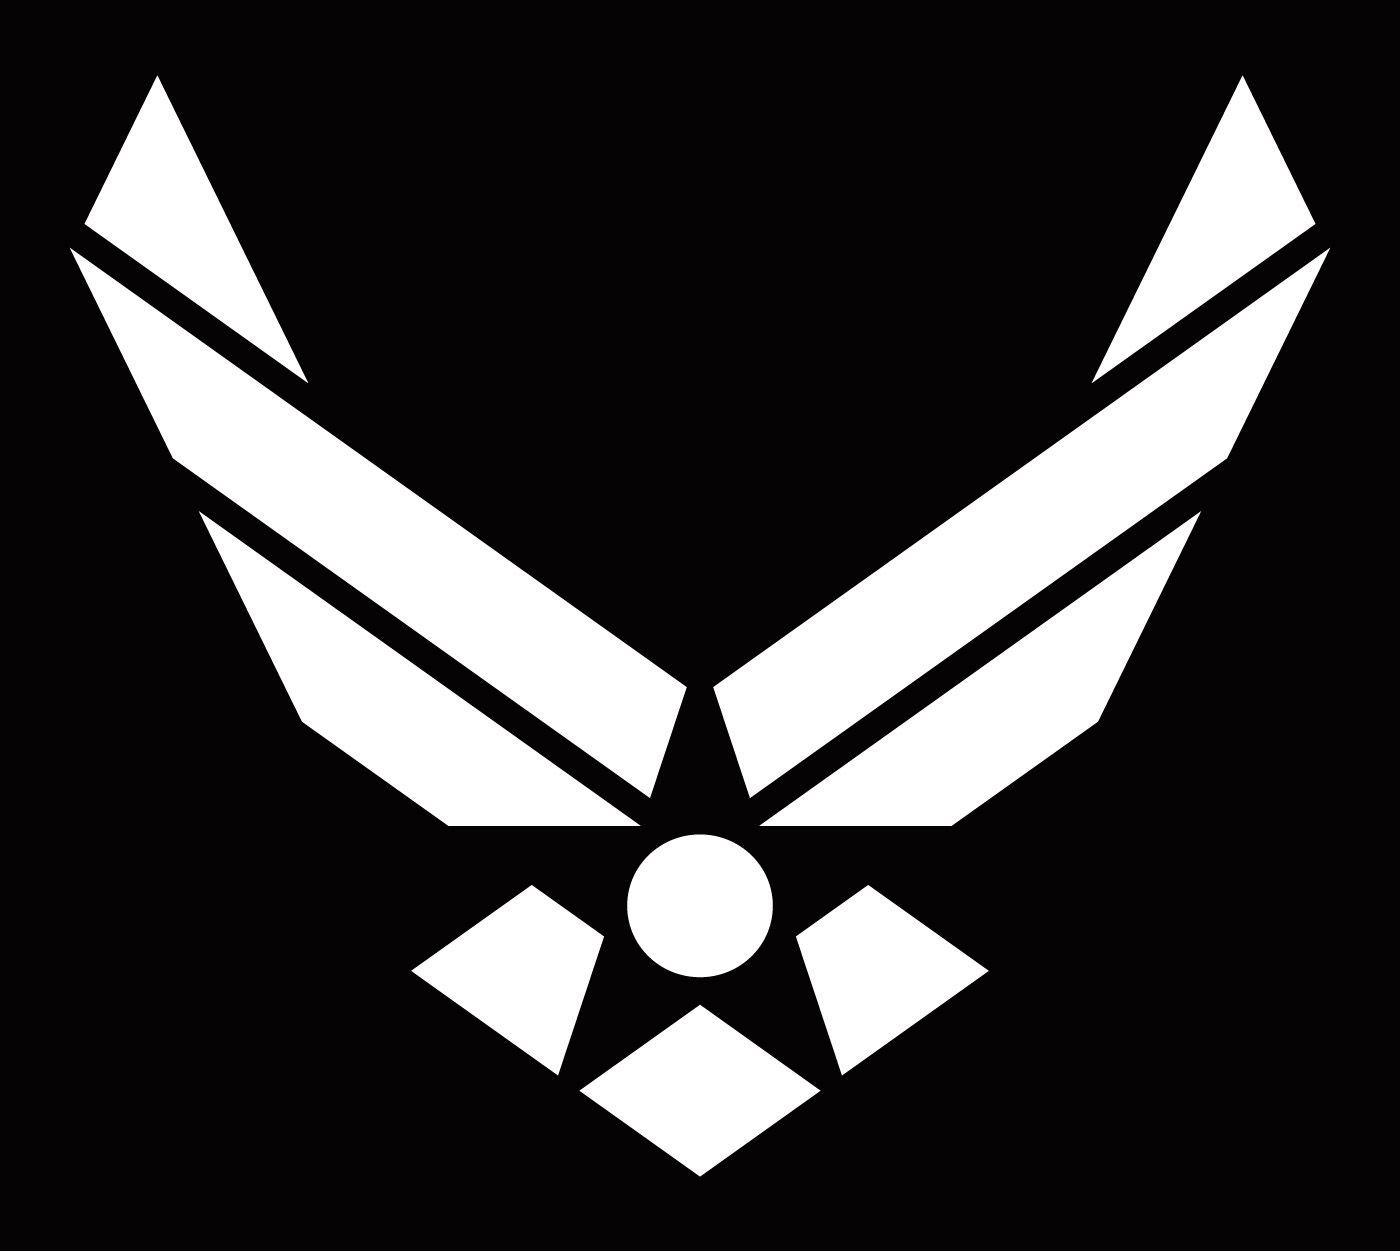 Black Air Force Logo - america flag with eagle and air force logo | Usaf+symbol+wallpaper ...